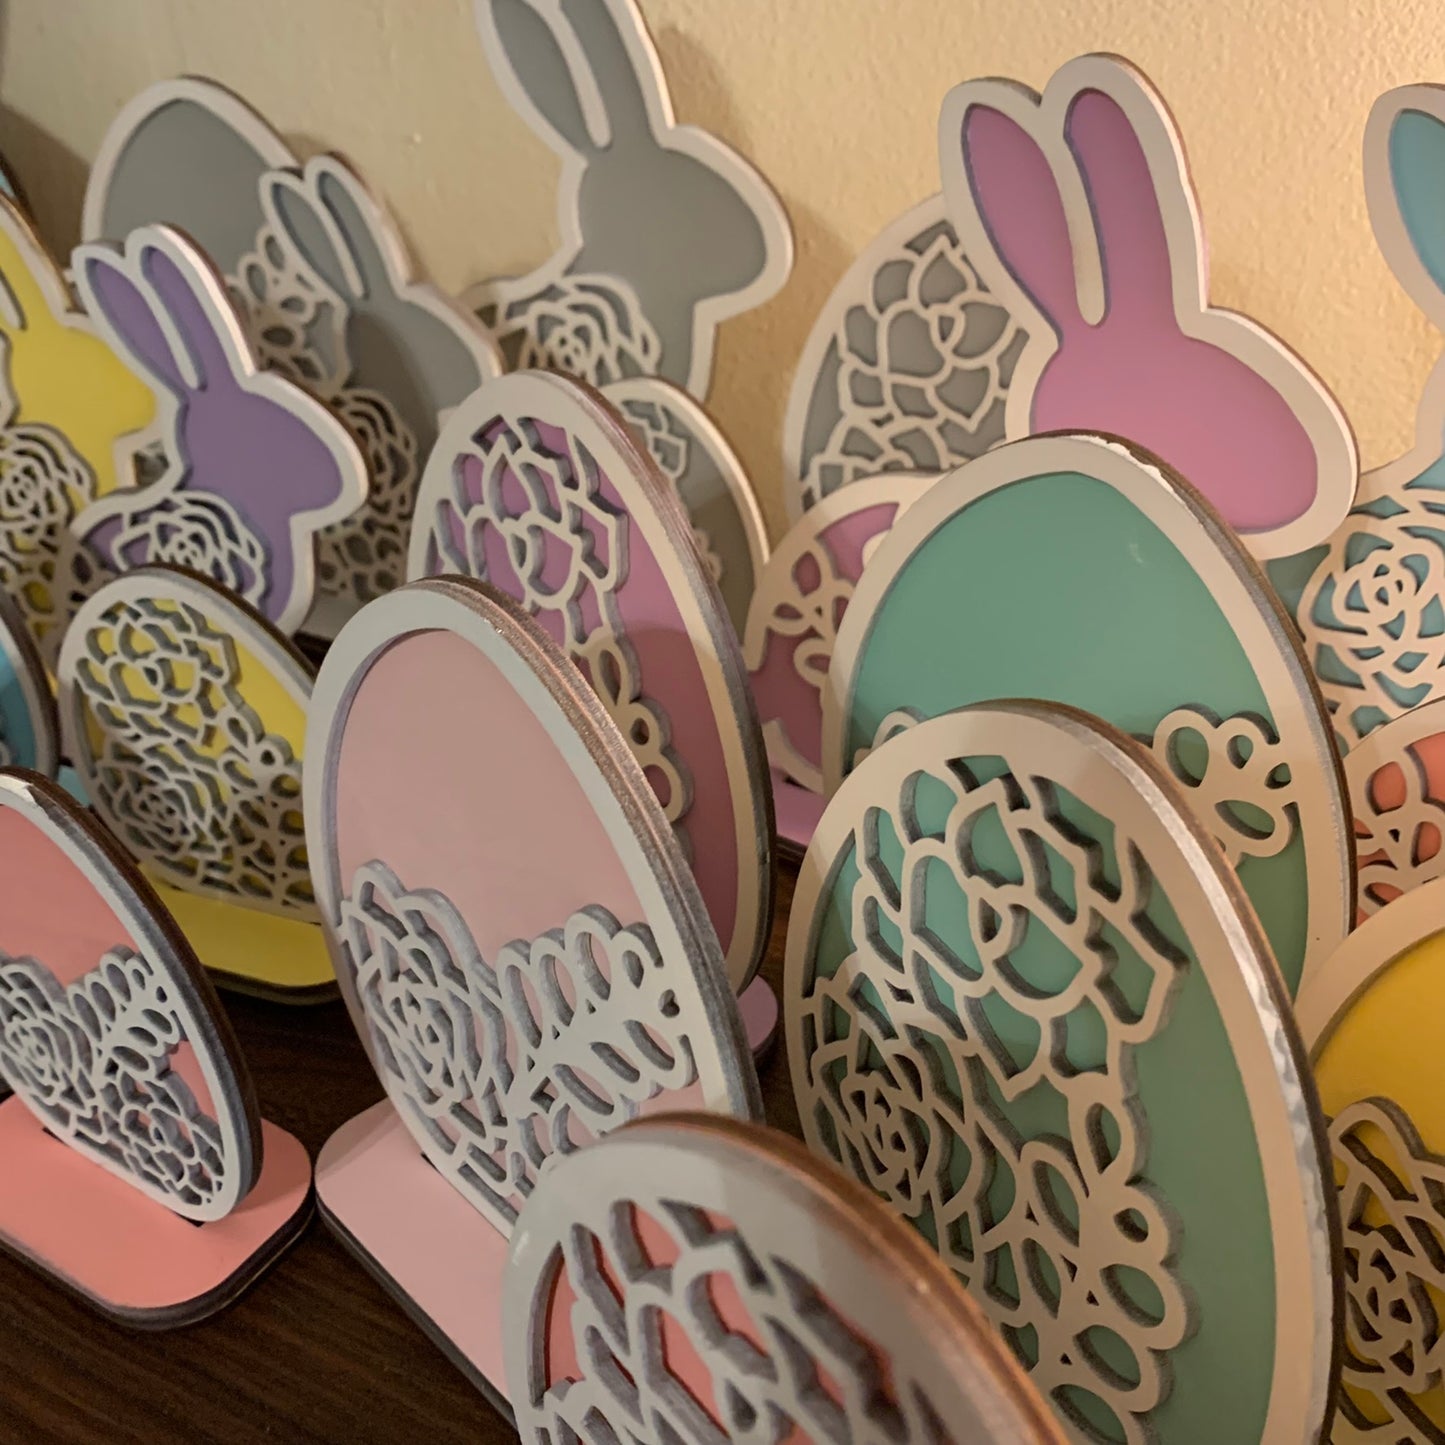 Layered Laser Cut Succulent Motif Easter Bunny and Eggs - Standing Shelf Sitter